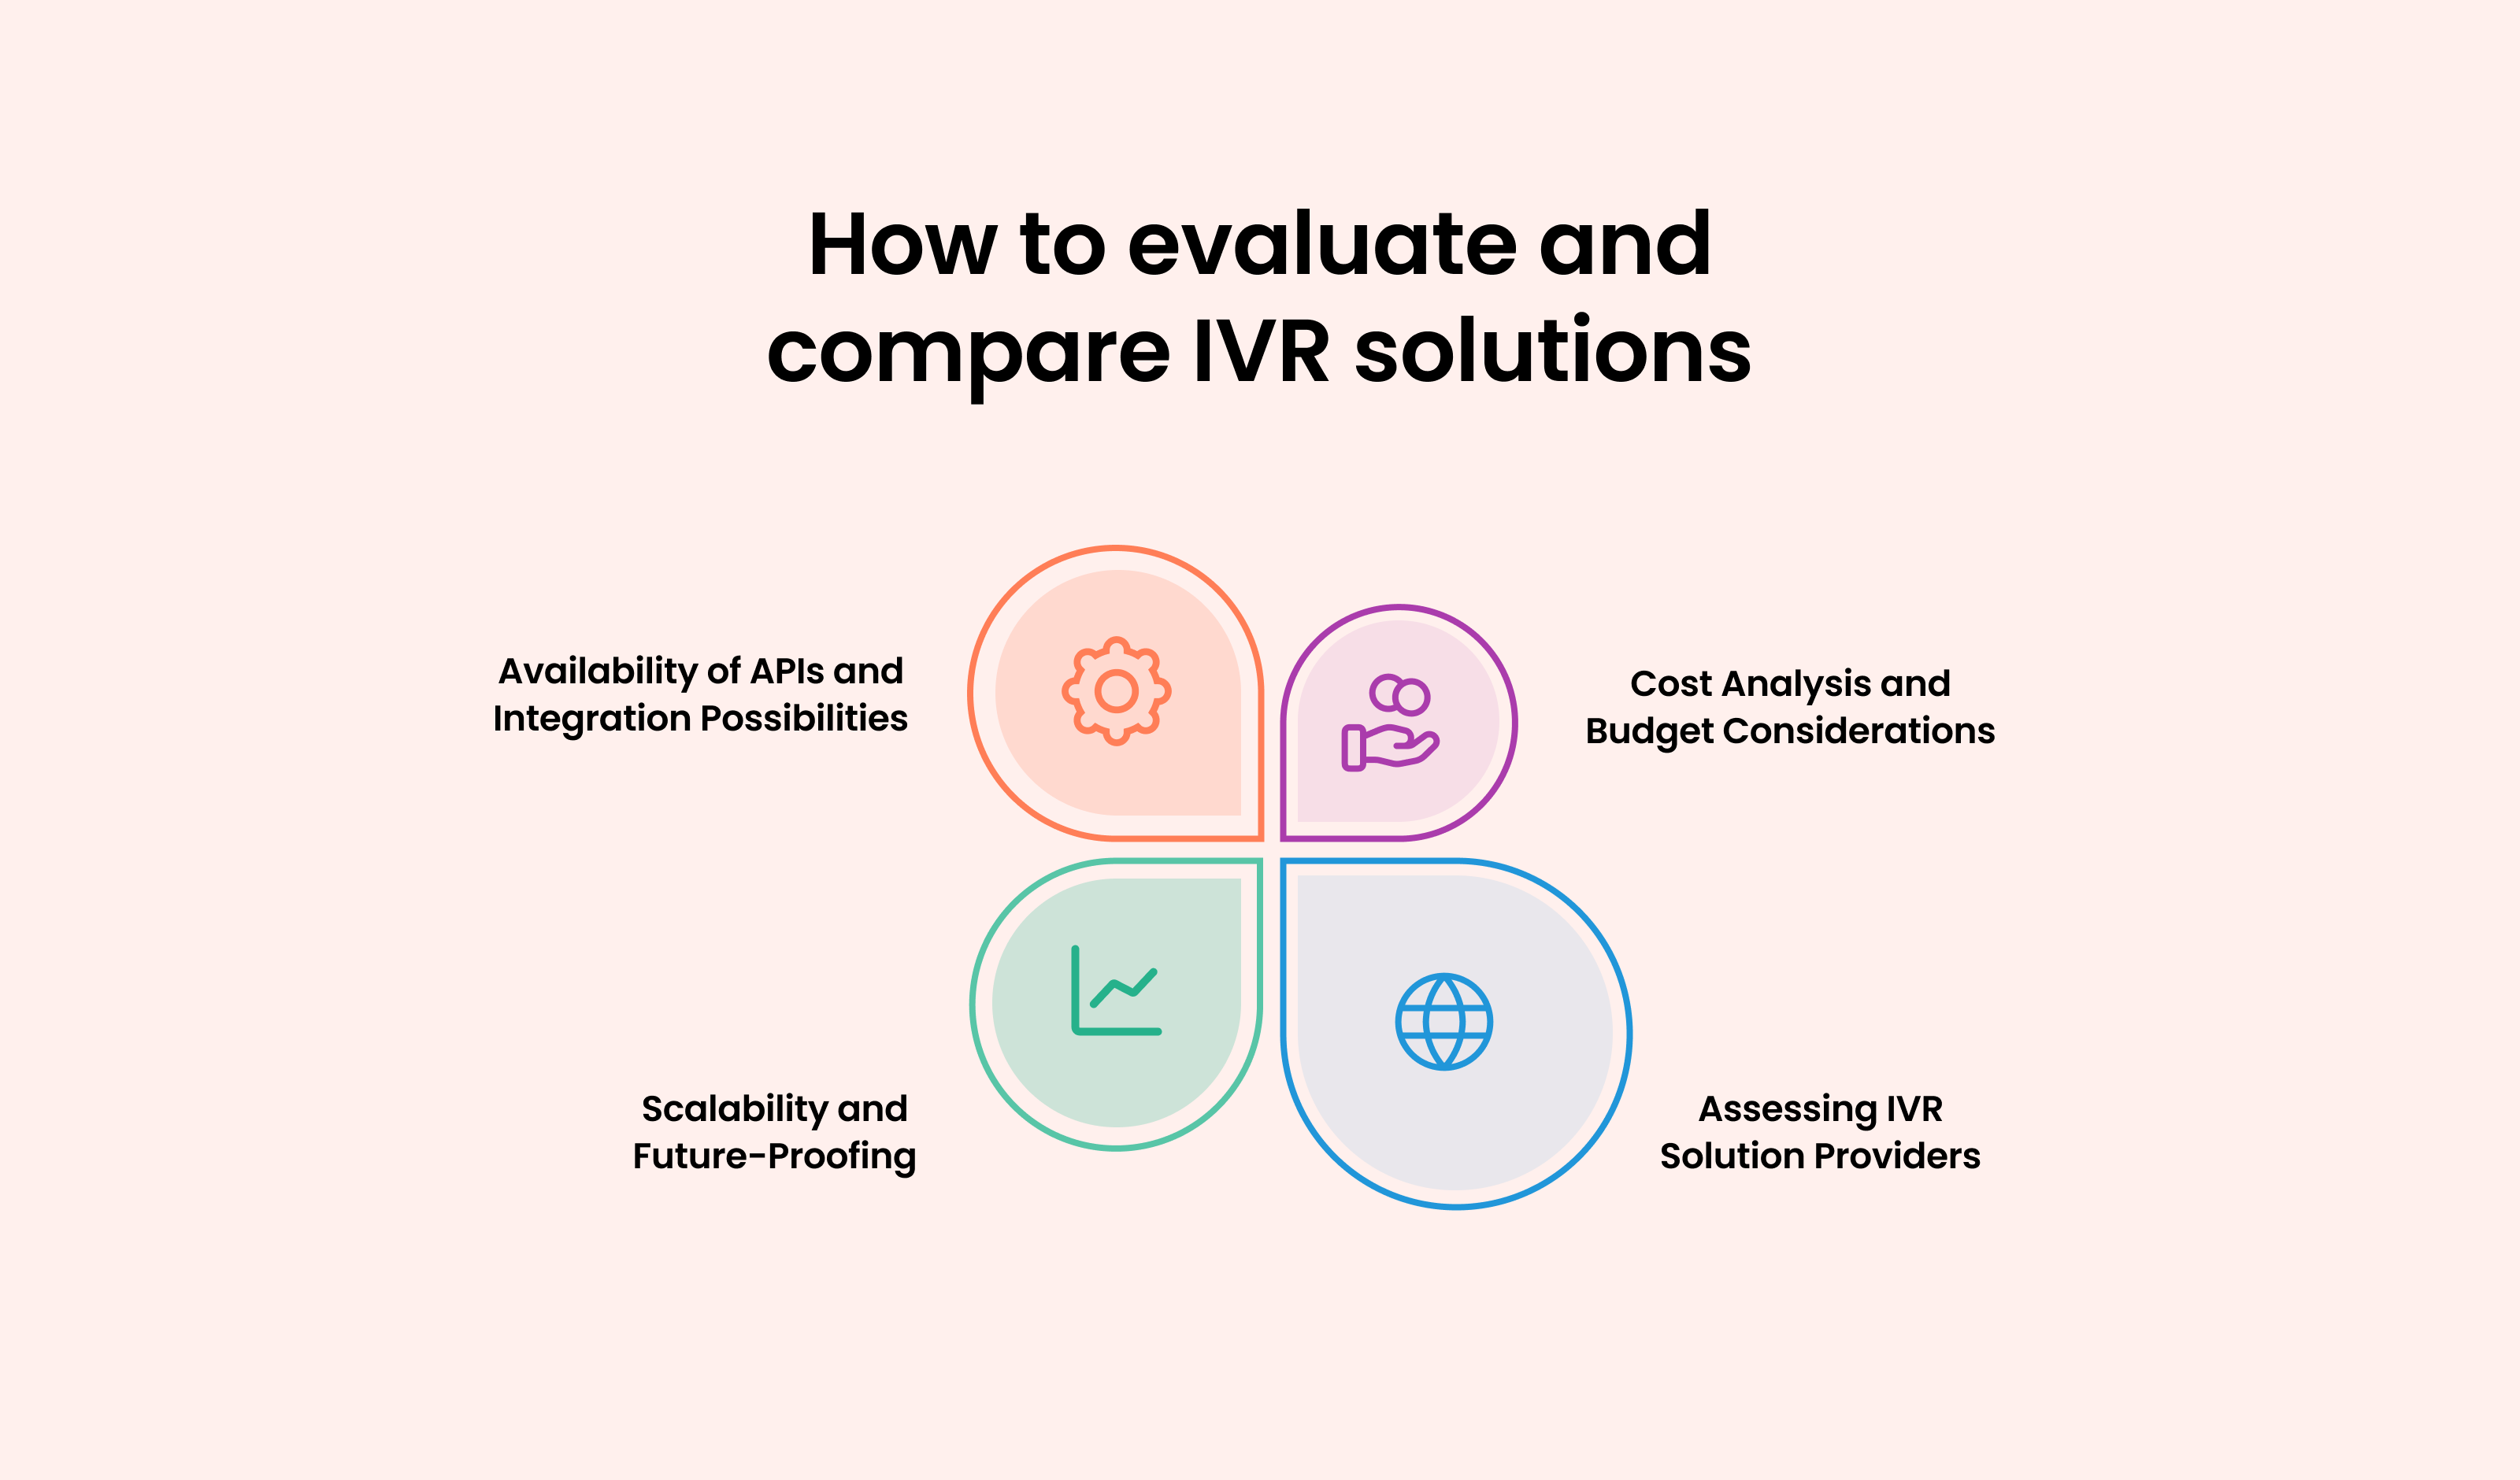 How to Evaluate and Compare IVR Solutions: